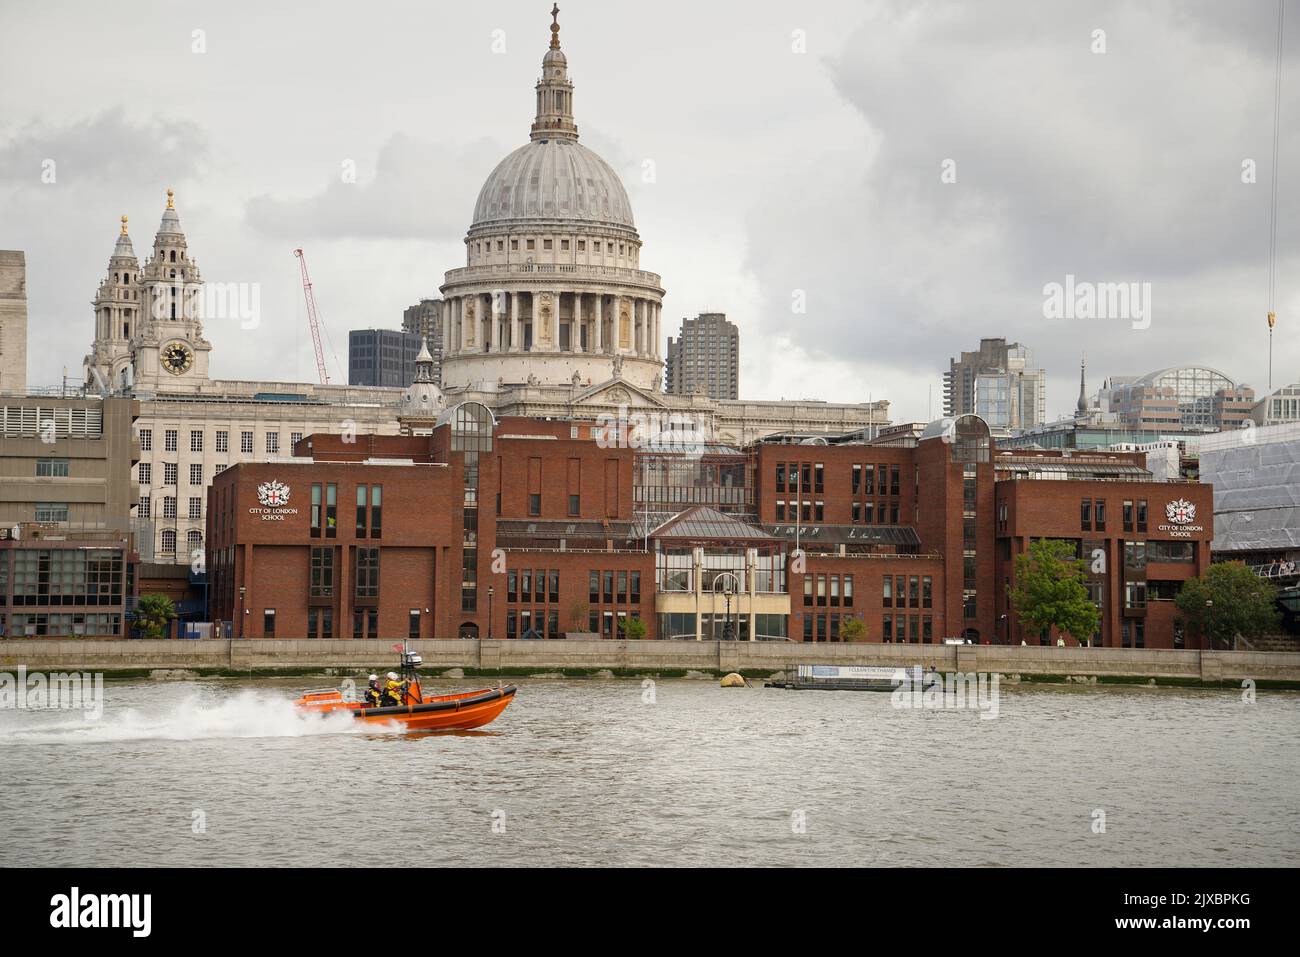 St Pauls Cathedral, London, England. An RNLI lifeboat rigid inflatable craft on the river Thames. Stock Photo